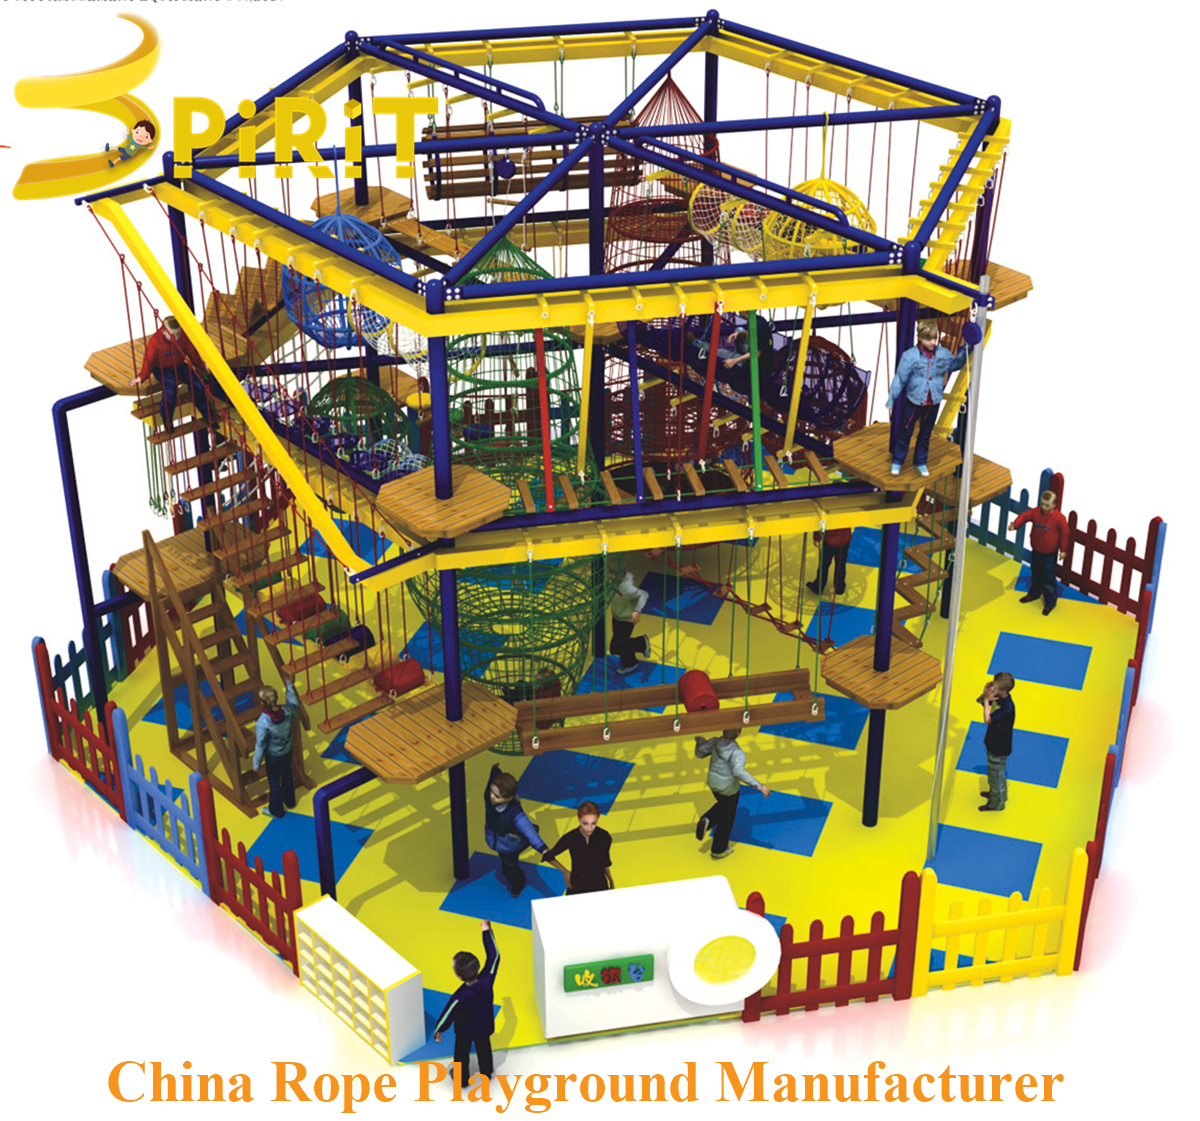 Indoor kids Adventure Play high rope course with plastic fence-SPIRIT PLAY,Outdoor Playground, Indoor Playground,Trampoline Park,Outdoor Fitness,Inflatable,Soft Playground,Ninja Warrior,Trampoline Park,Playground Structure,Play Structure,Outdoor Fitness,Water Park,Play System,Freestanding,Interactive,independente ,Inklusibo, Park, Pagsaka sa Bungbong, Dula sa Bata